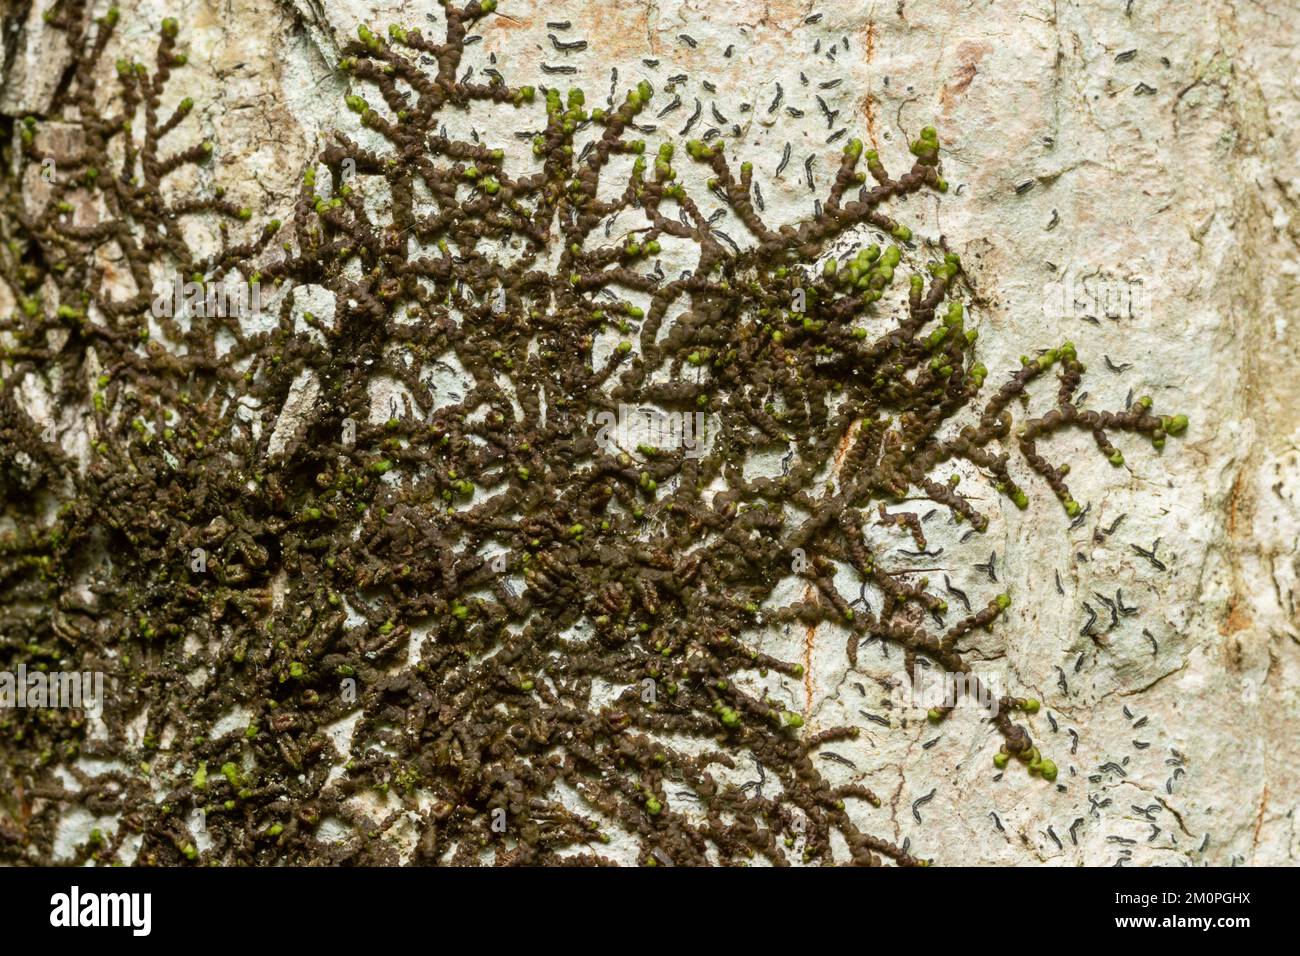 A close-up of a species of liverwort, the Dilated scalewort growing on a broadleaved tree trunk in an old-growth forest in Latvia, Europe Stock Photo